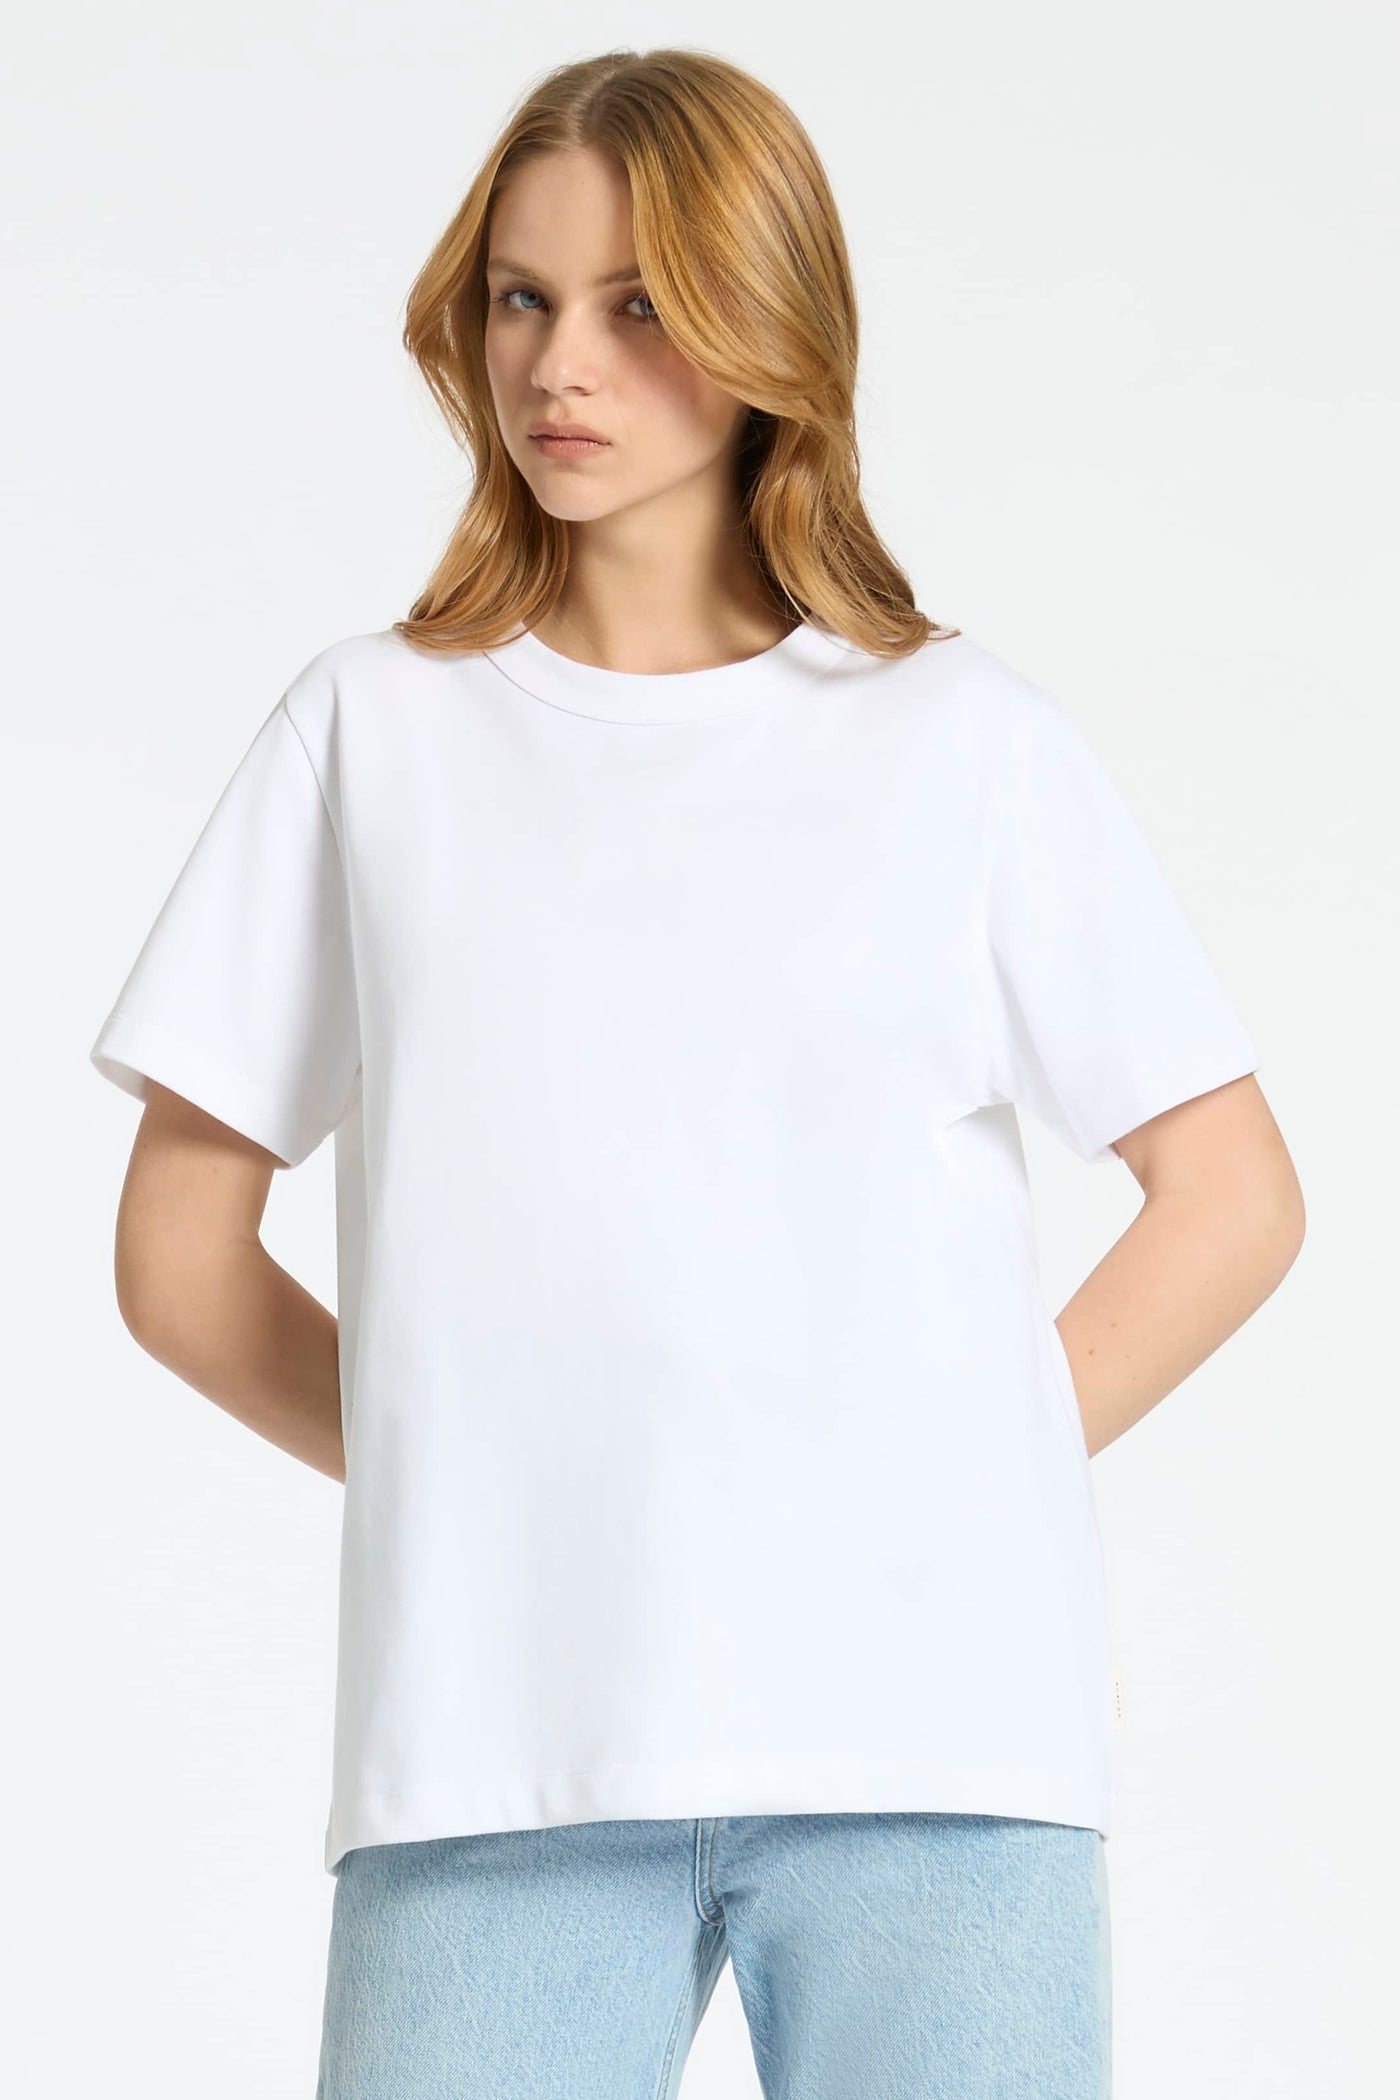 With its pared back, relaxed appearance the 'Feels Right' tee will likely have you buying one in every colour. Constructed of 310gsm premium cotton, it's sure to become a staple of your wardrobe for seasons to come.   100% cotton 310gsm Relaxed/oversized fit Classic crew neckline Sits below the waistband for moderate, everyday coverage